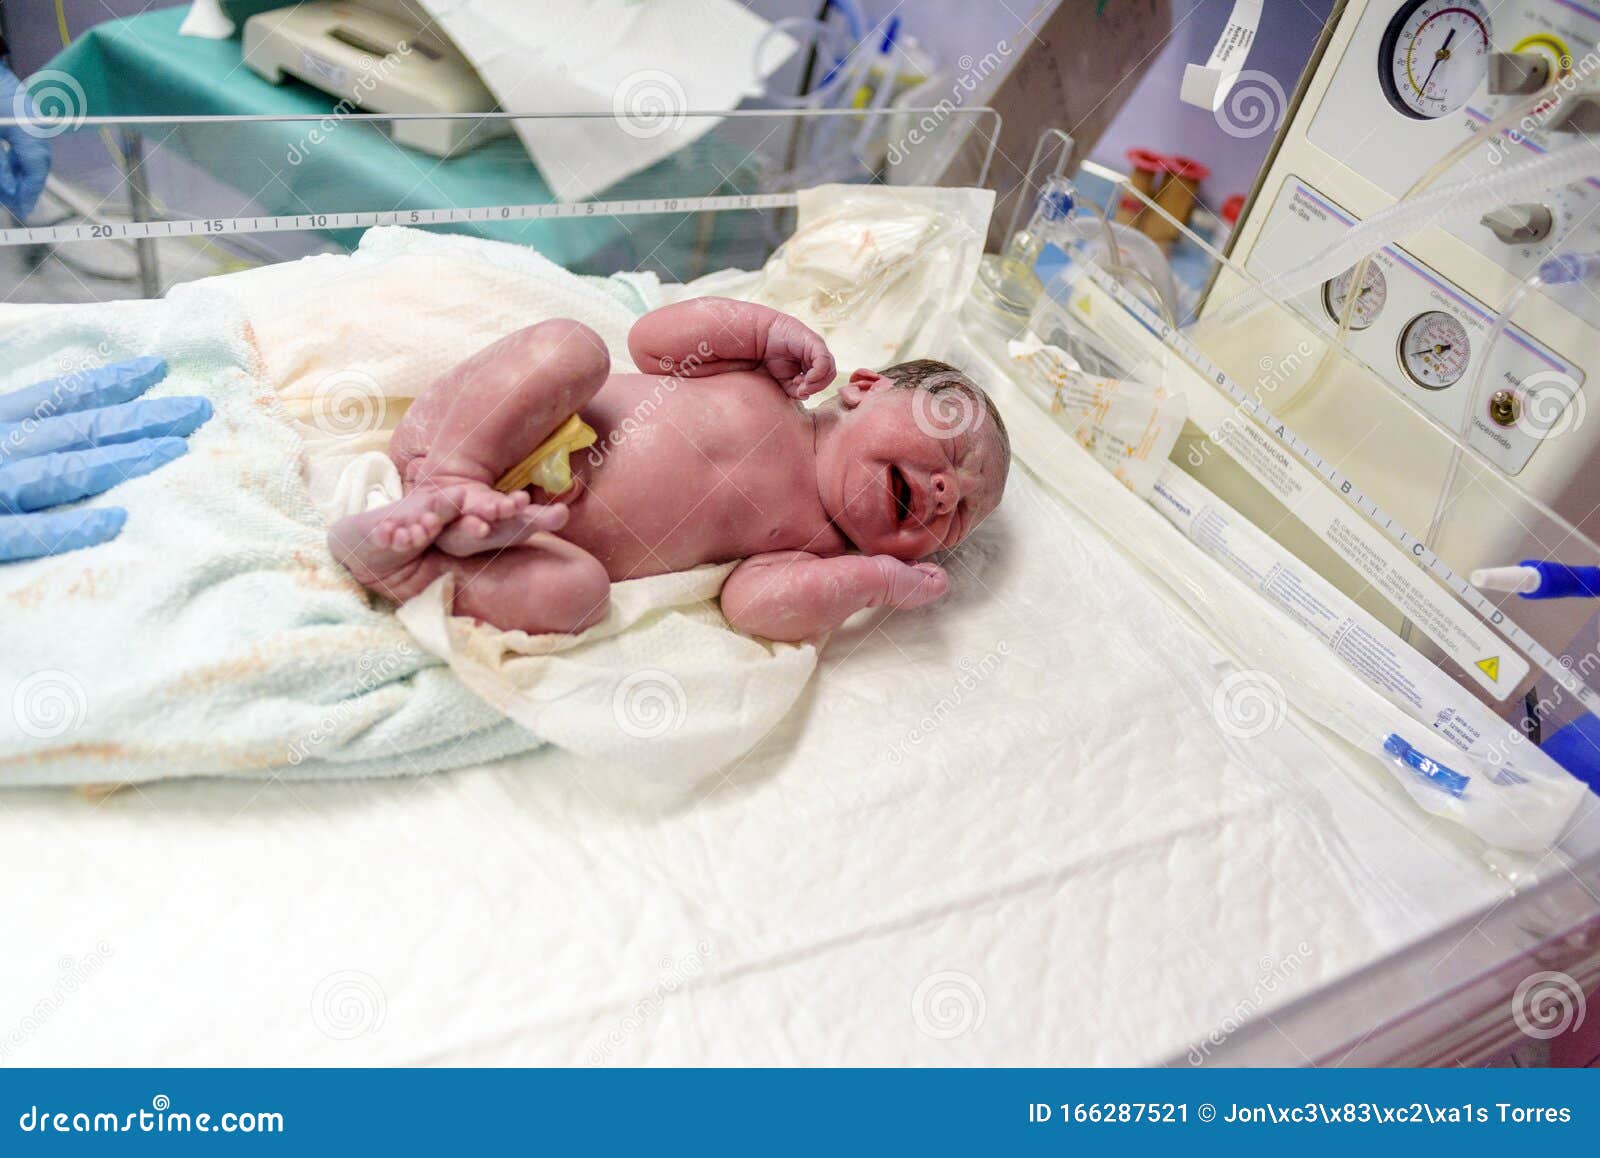 Newborn Baby Crying In Hospital Operating Room Stock Image Image Of